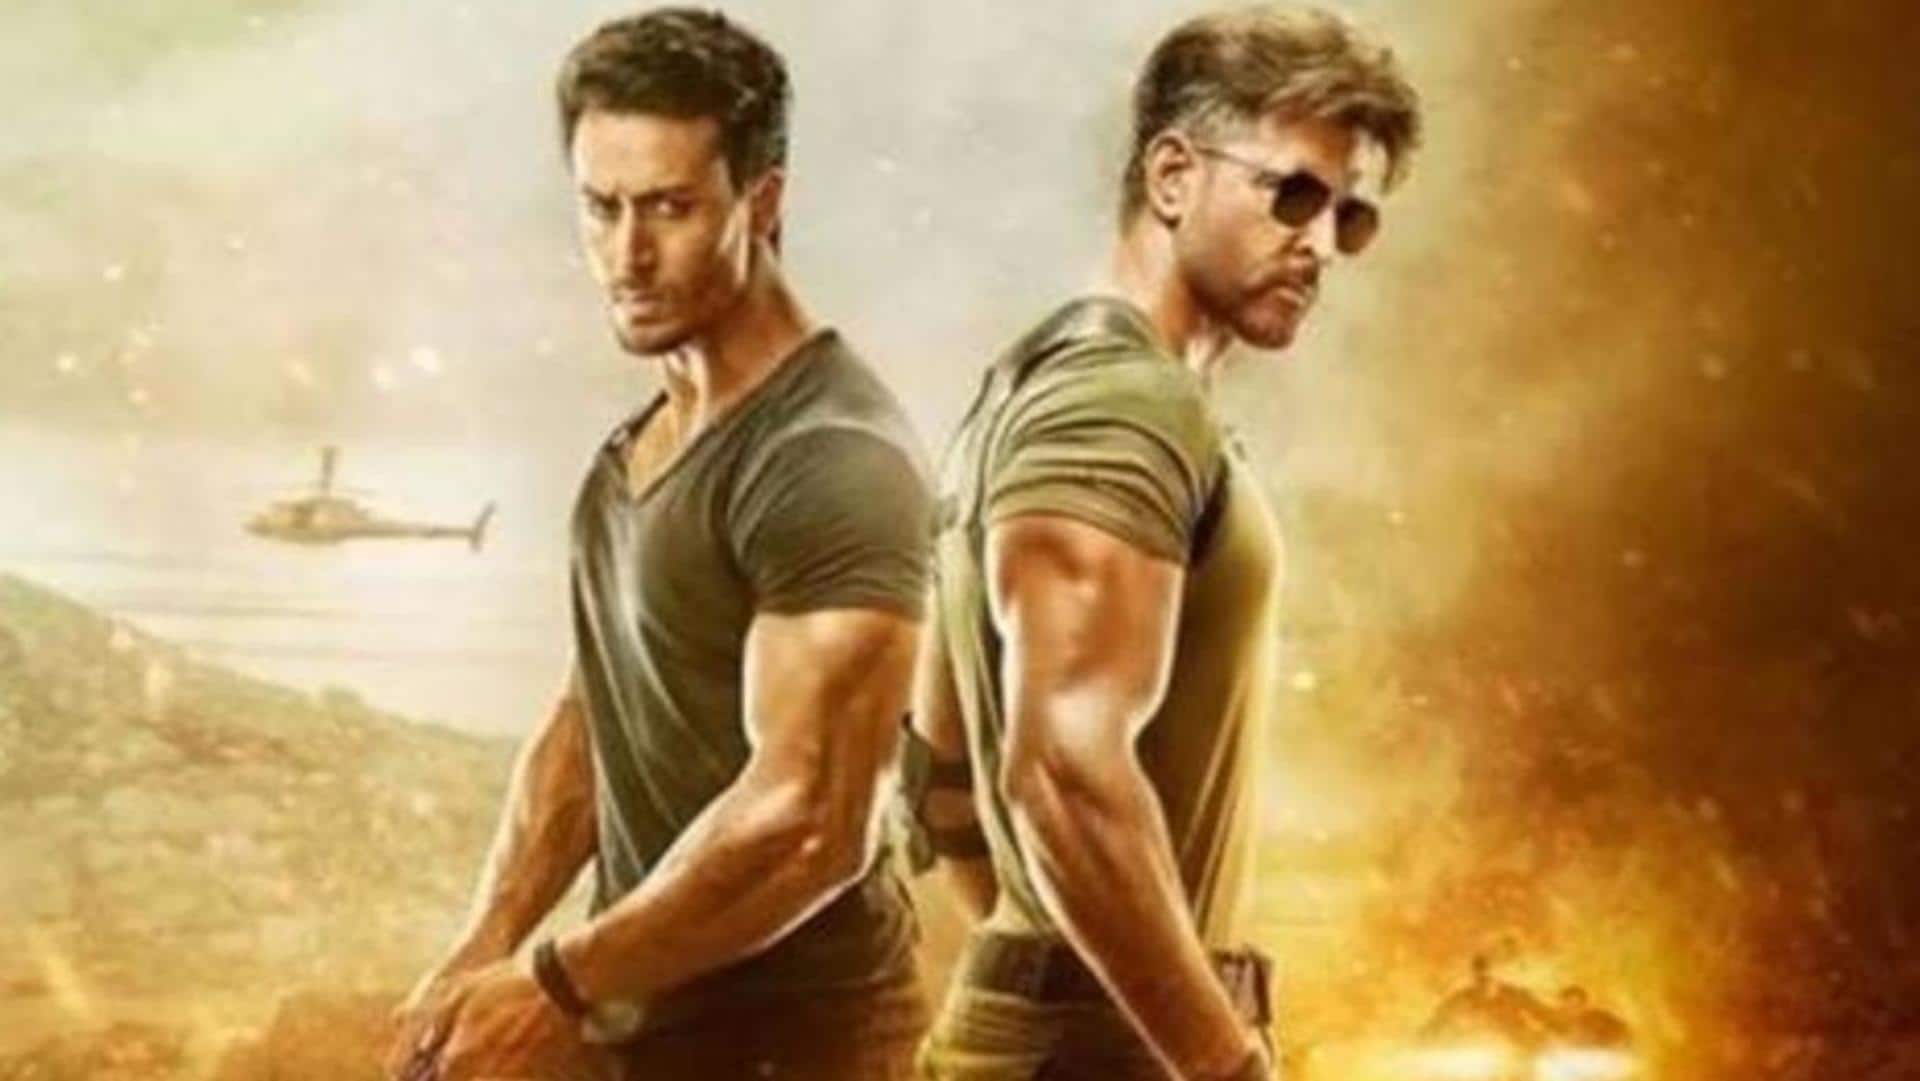 Hrithik's 'War 2' to go on floors this year: Report